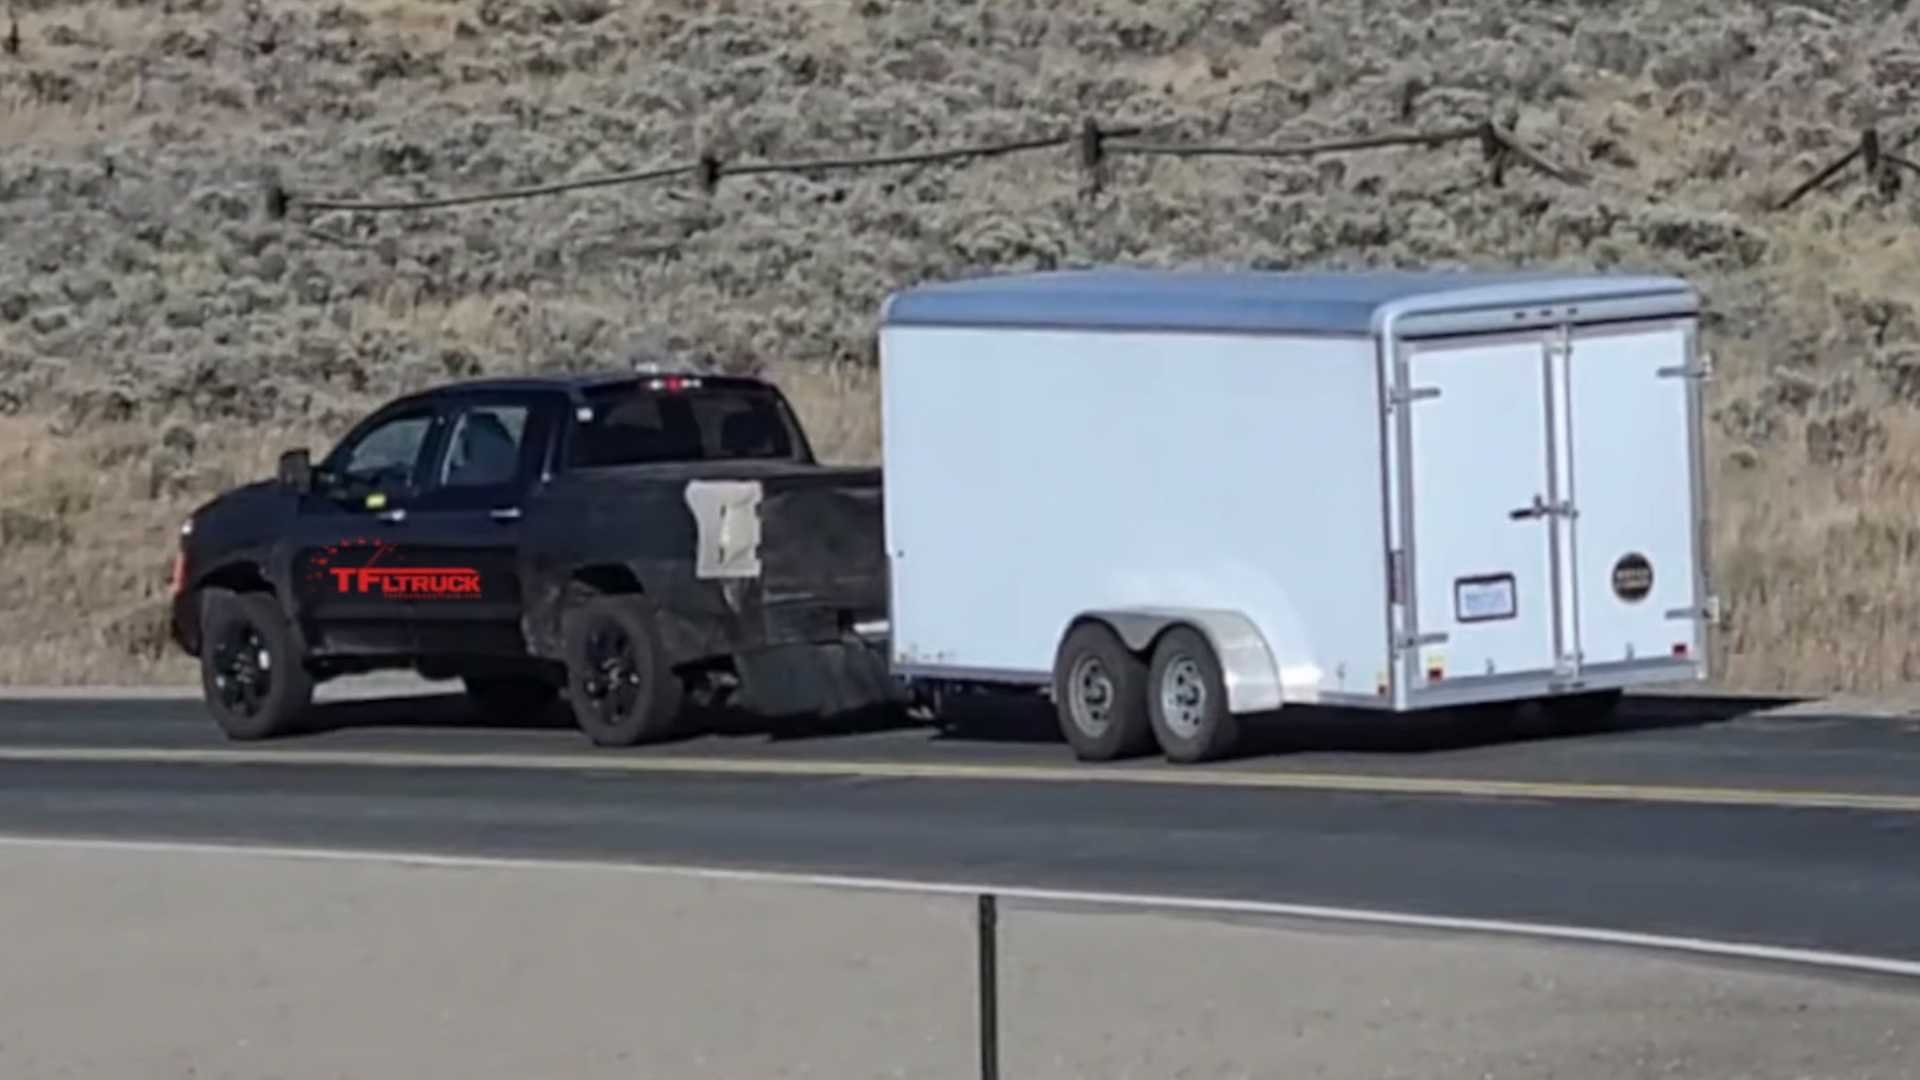 Next-Gen Toyota Tundra Spied On Curvy Roads Towing Trailer